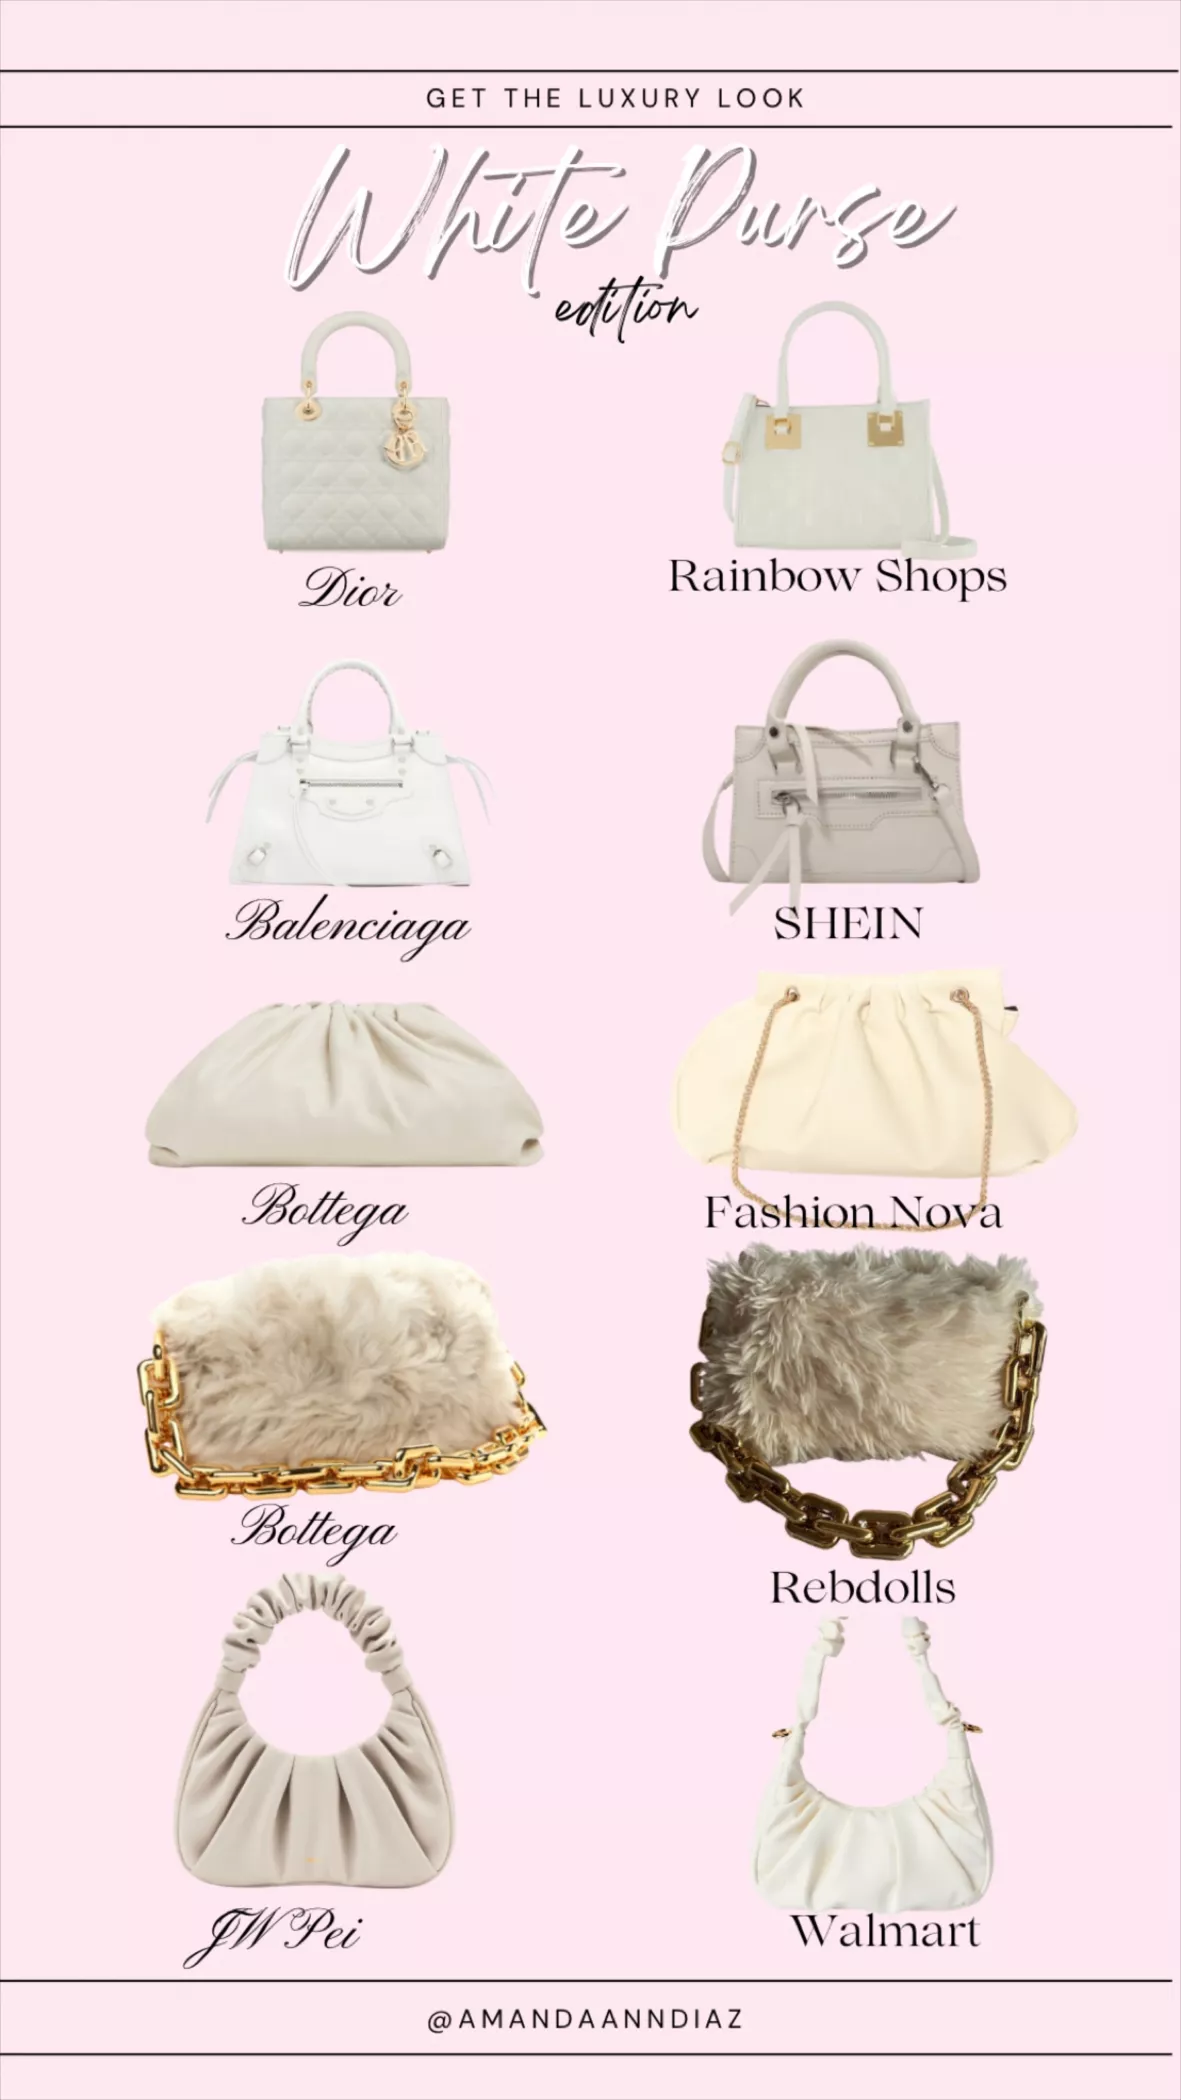 Nass boutique is a multi-brand boutique curating women's clothing and  accessoriesVINTAGE CHANEL LARGE QUILTED TOP BAG